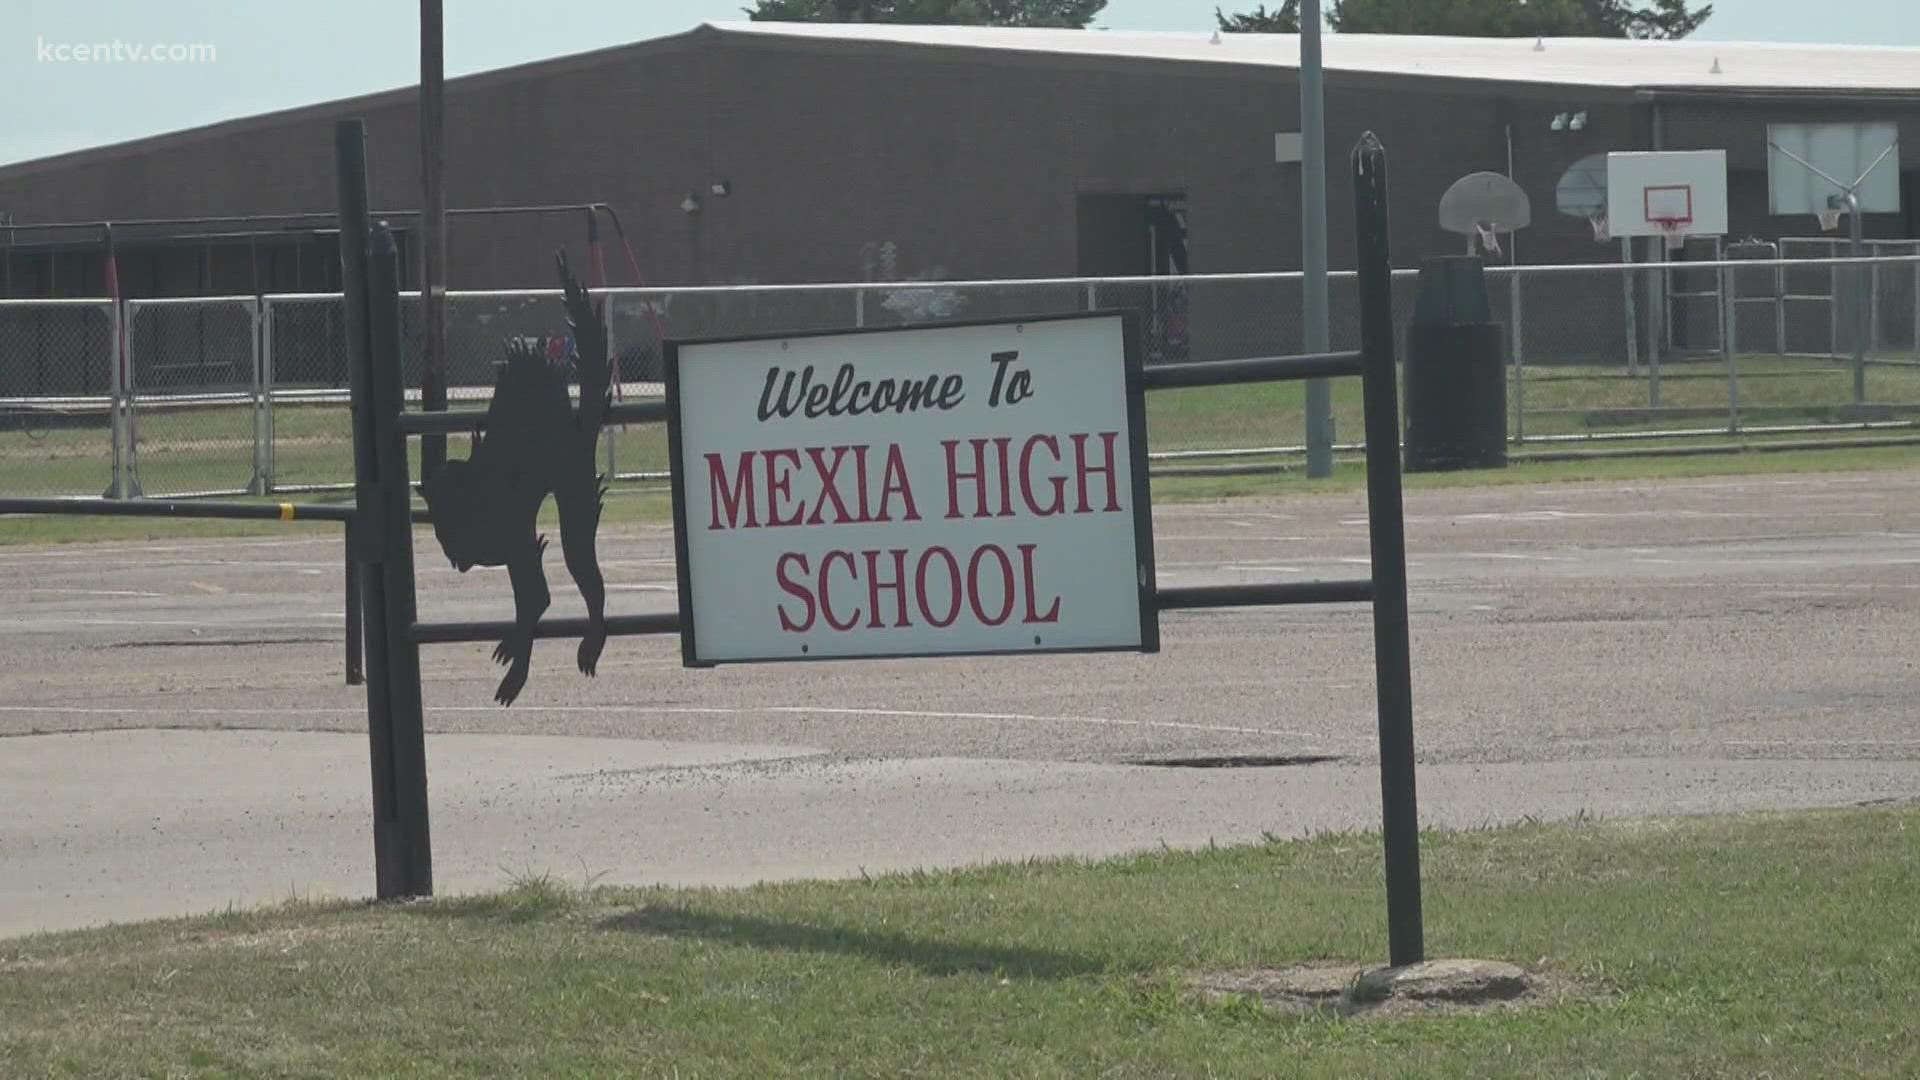 Mexia ISD added that classes will be canceled at Mexia High School on Tuesday.